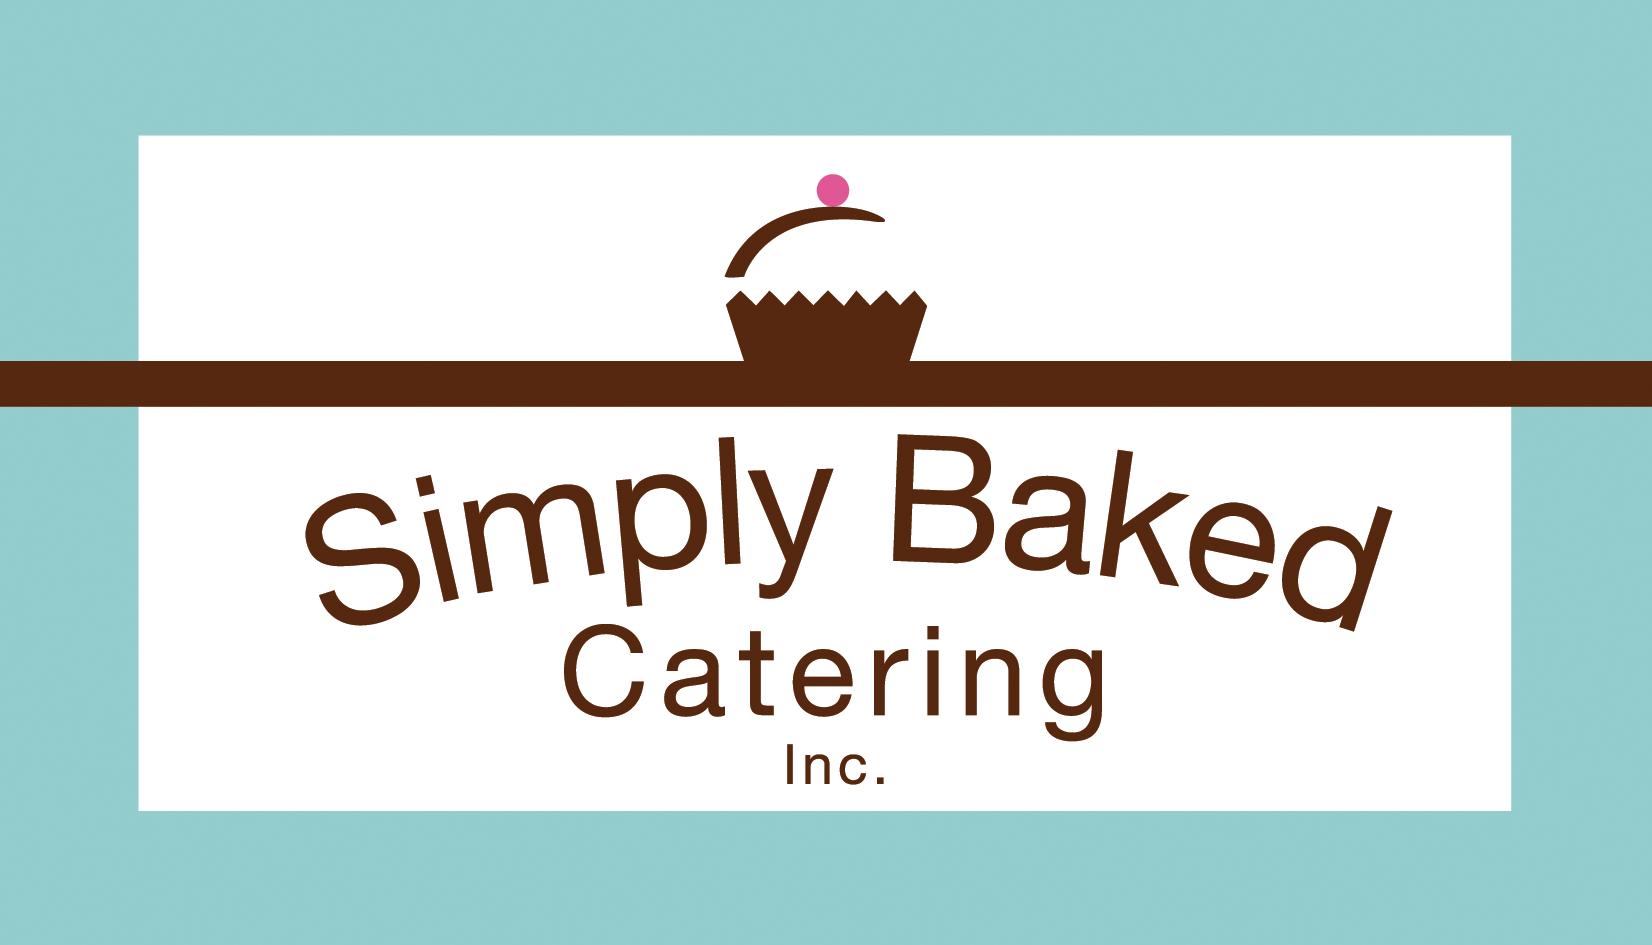 Simply Baked Catering Inc.